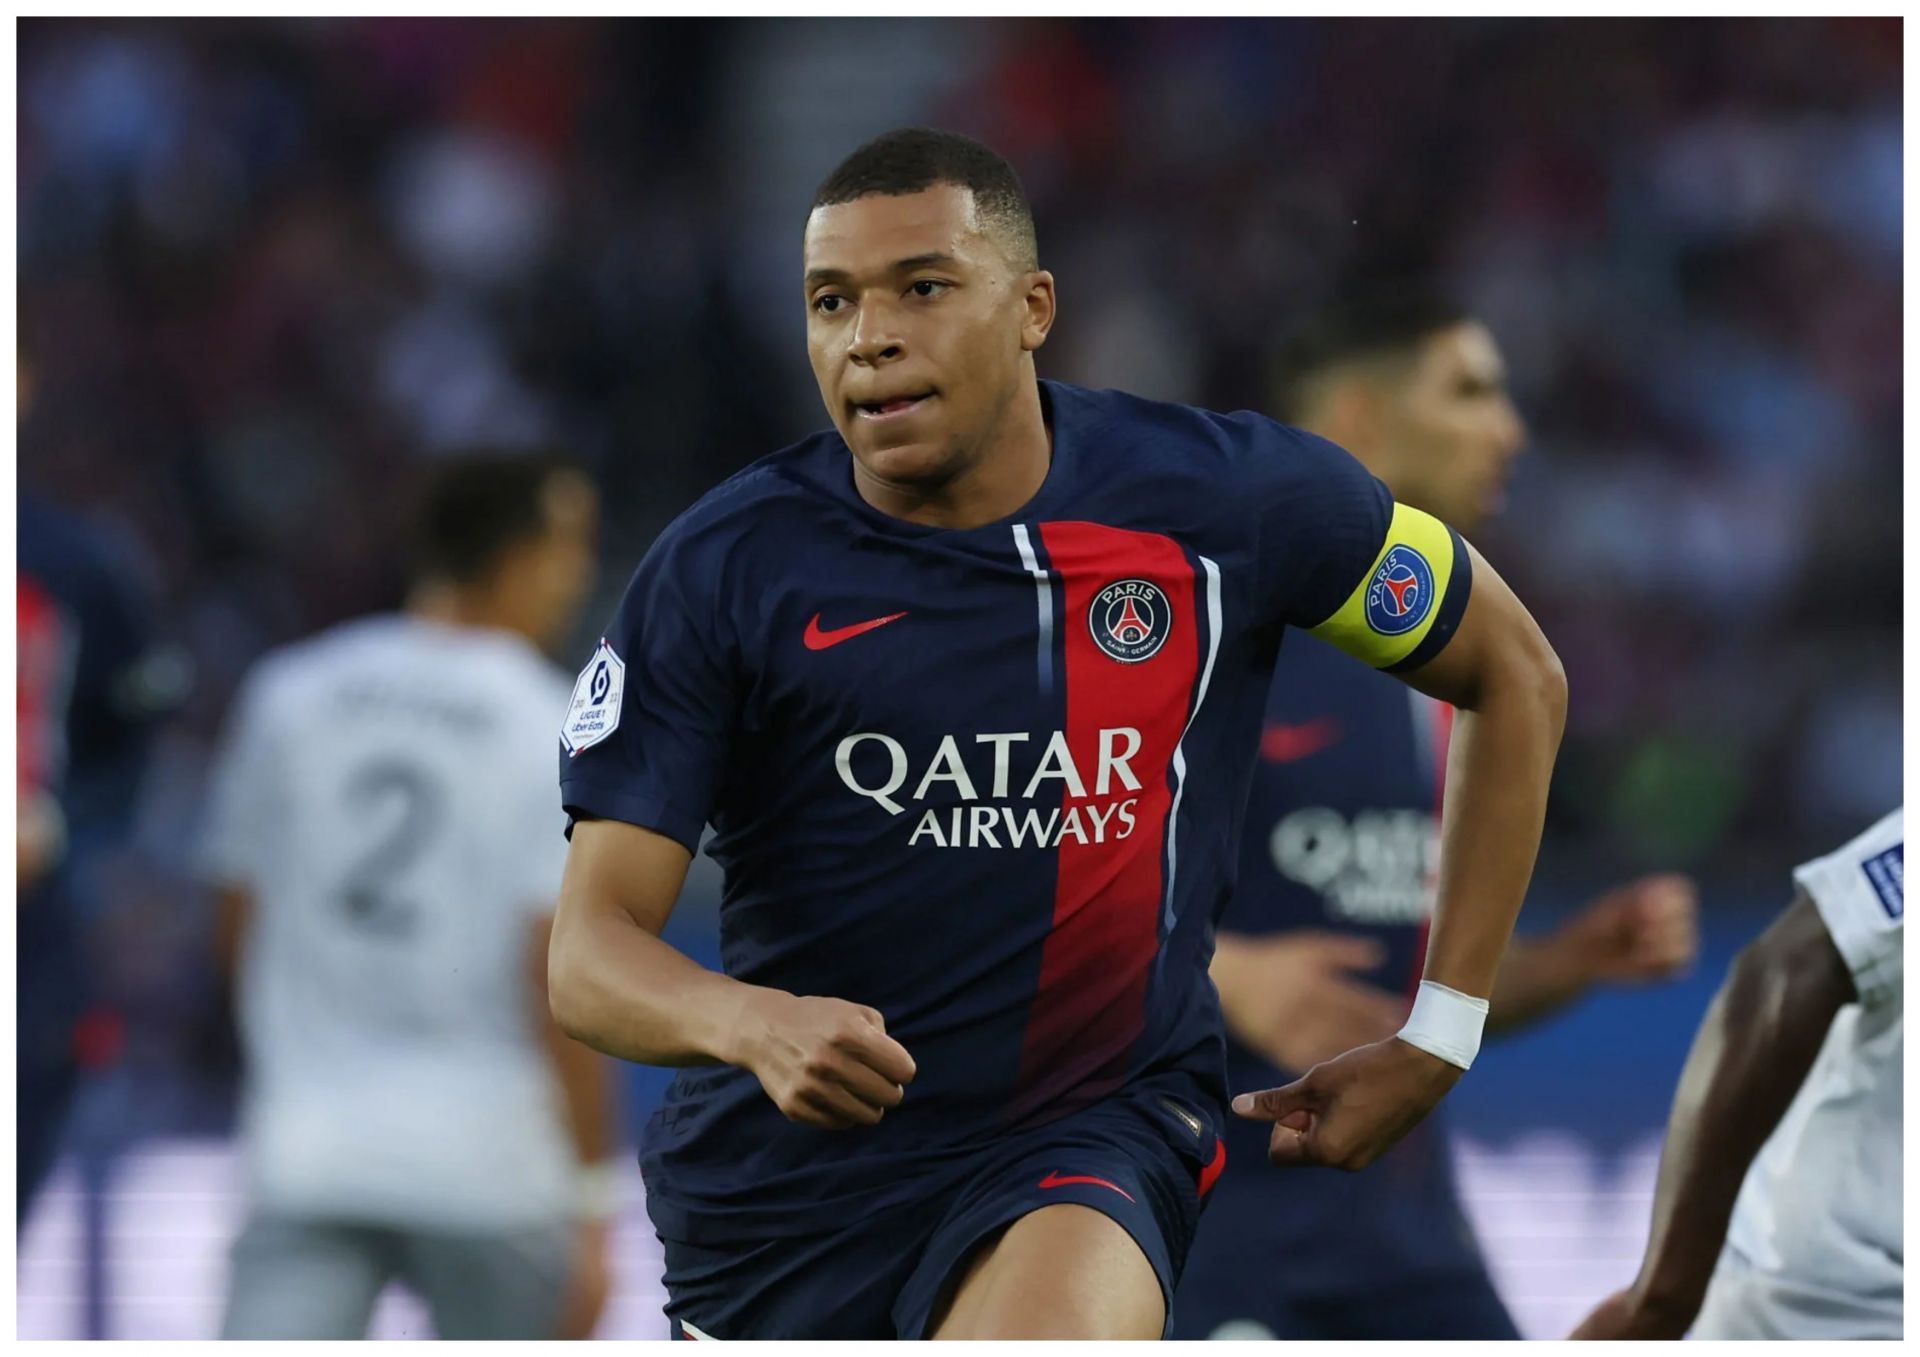 Kylian Mbappe will leave PSG after 7 years (Photo credit: Ian MacNicol/Getty Images)